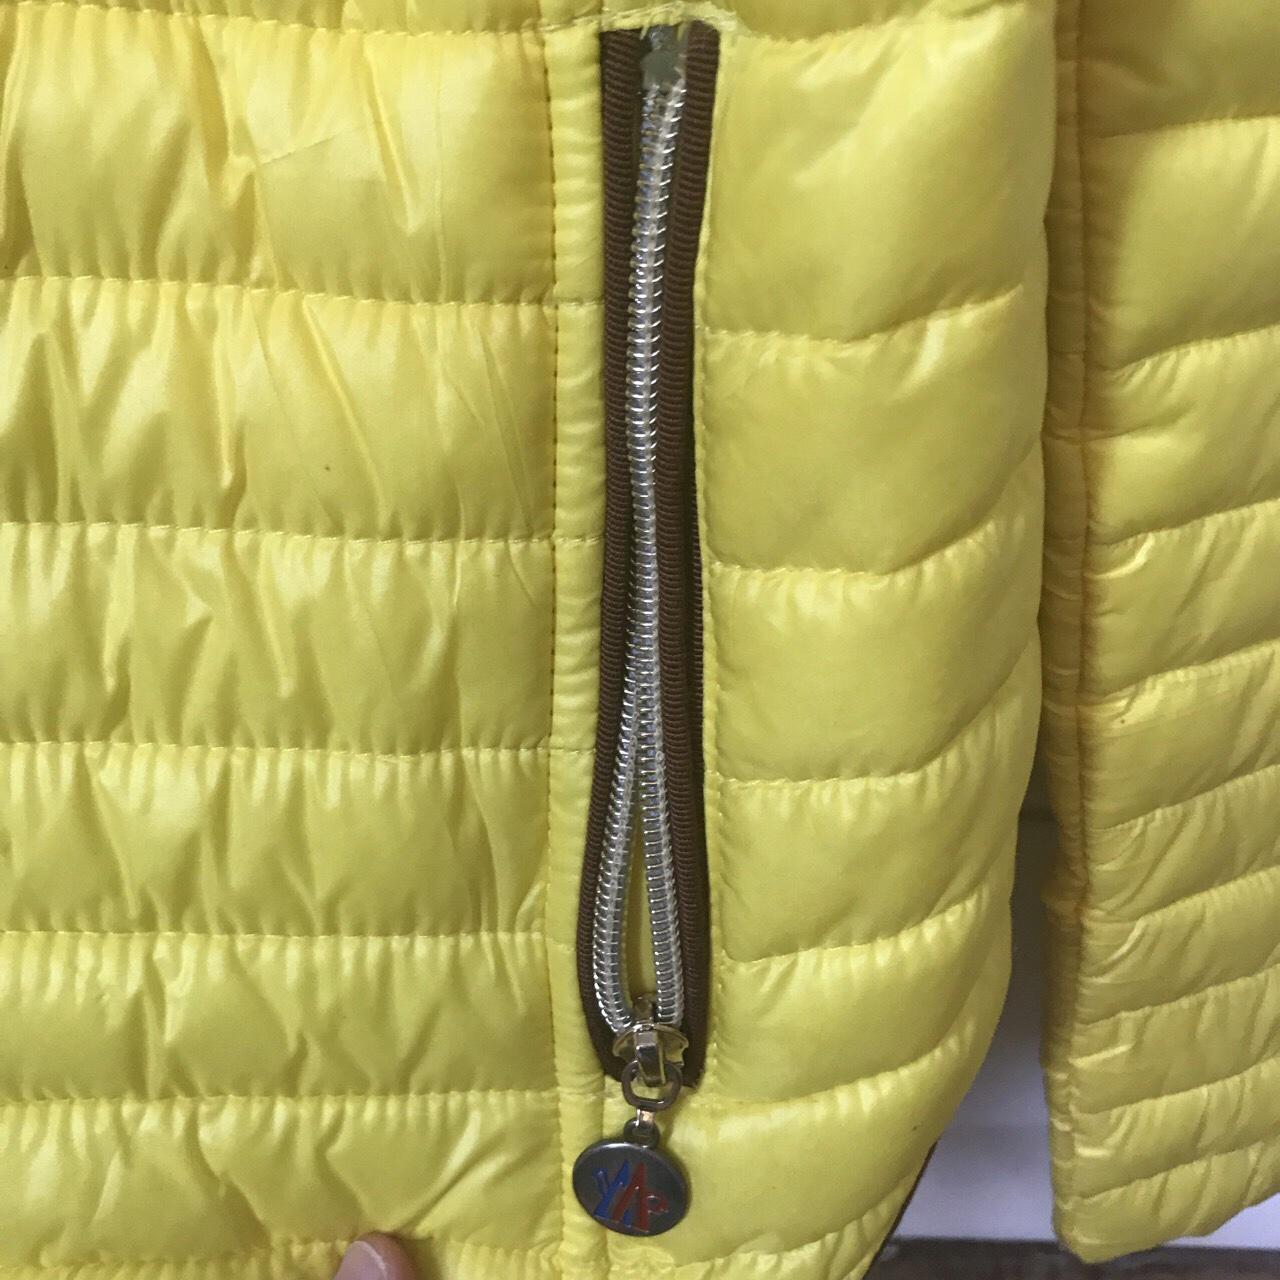 Moncler (fake) lightweight yellow jacket in Horsham for £15.00 for sale ...